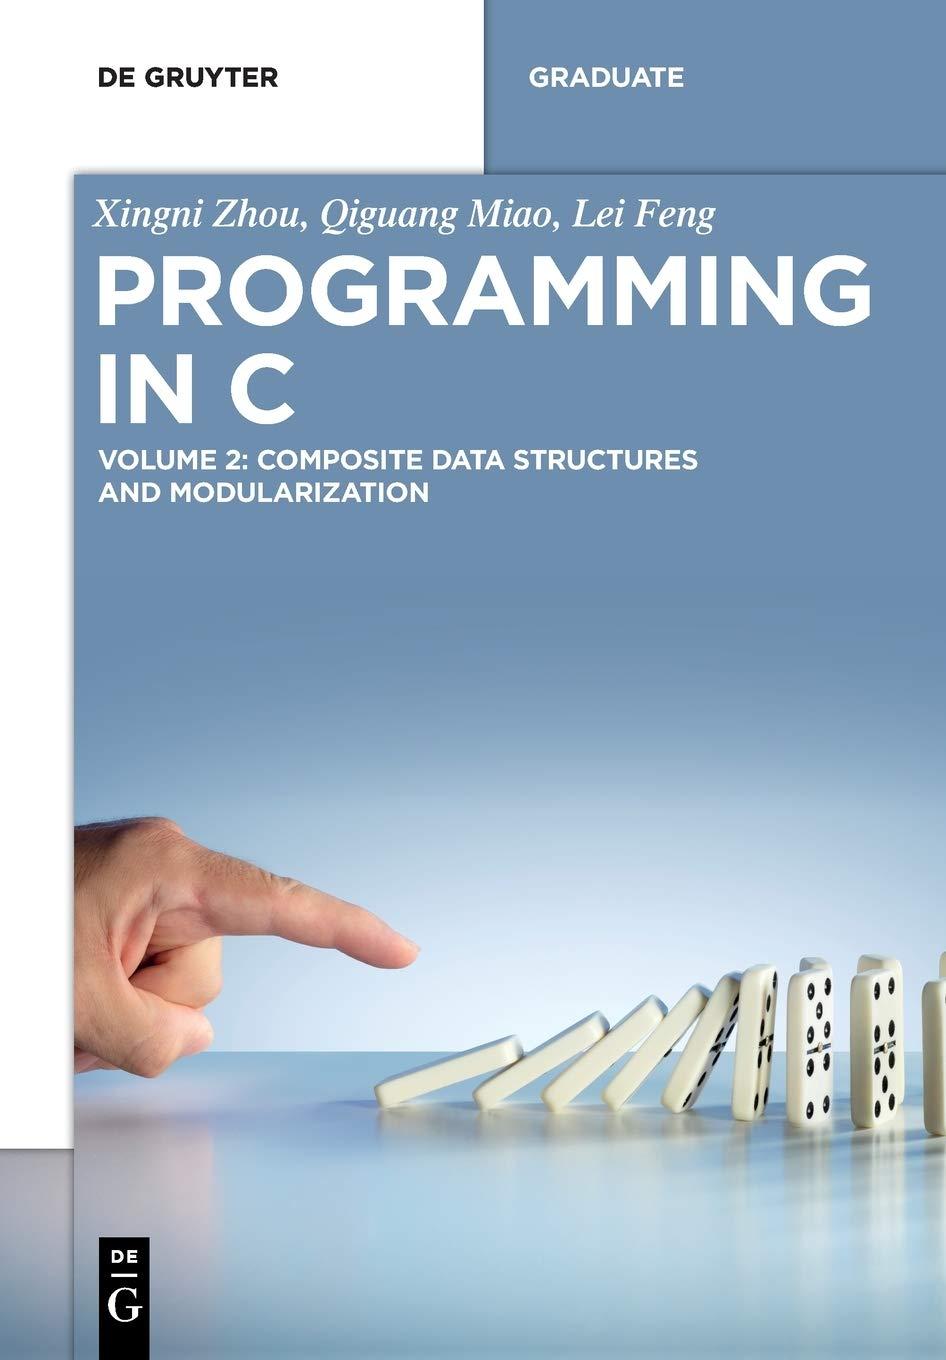 programming in c volume 2 composite data structures and modularization de gruyter textbook 1st edition xingni